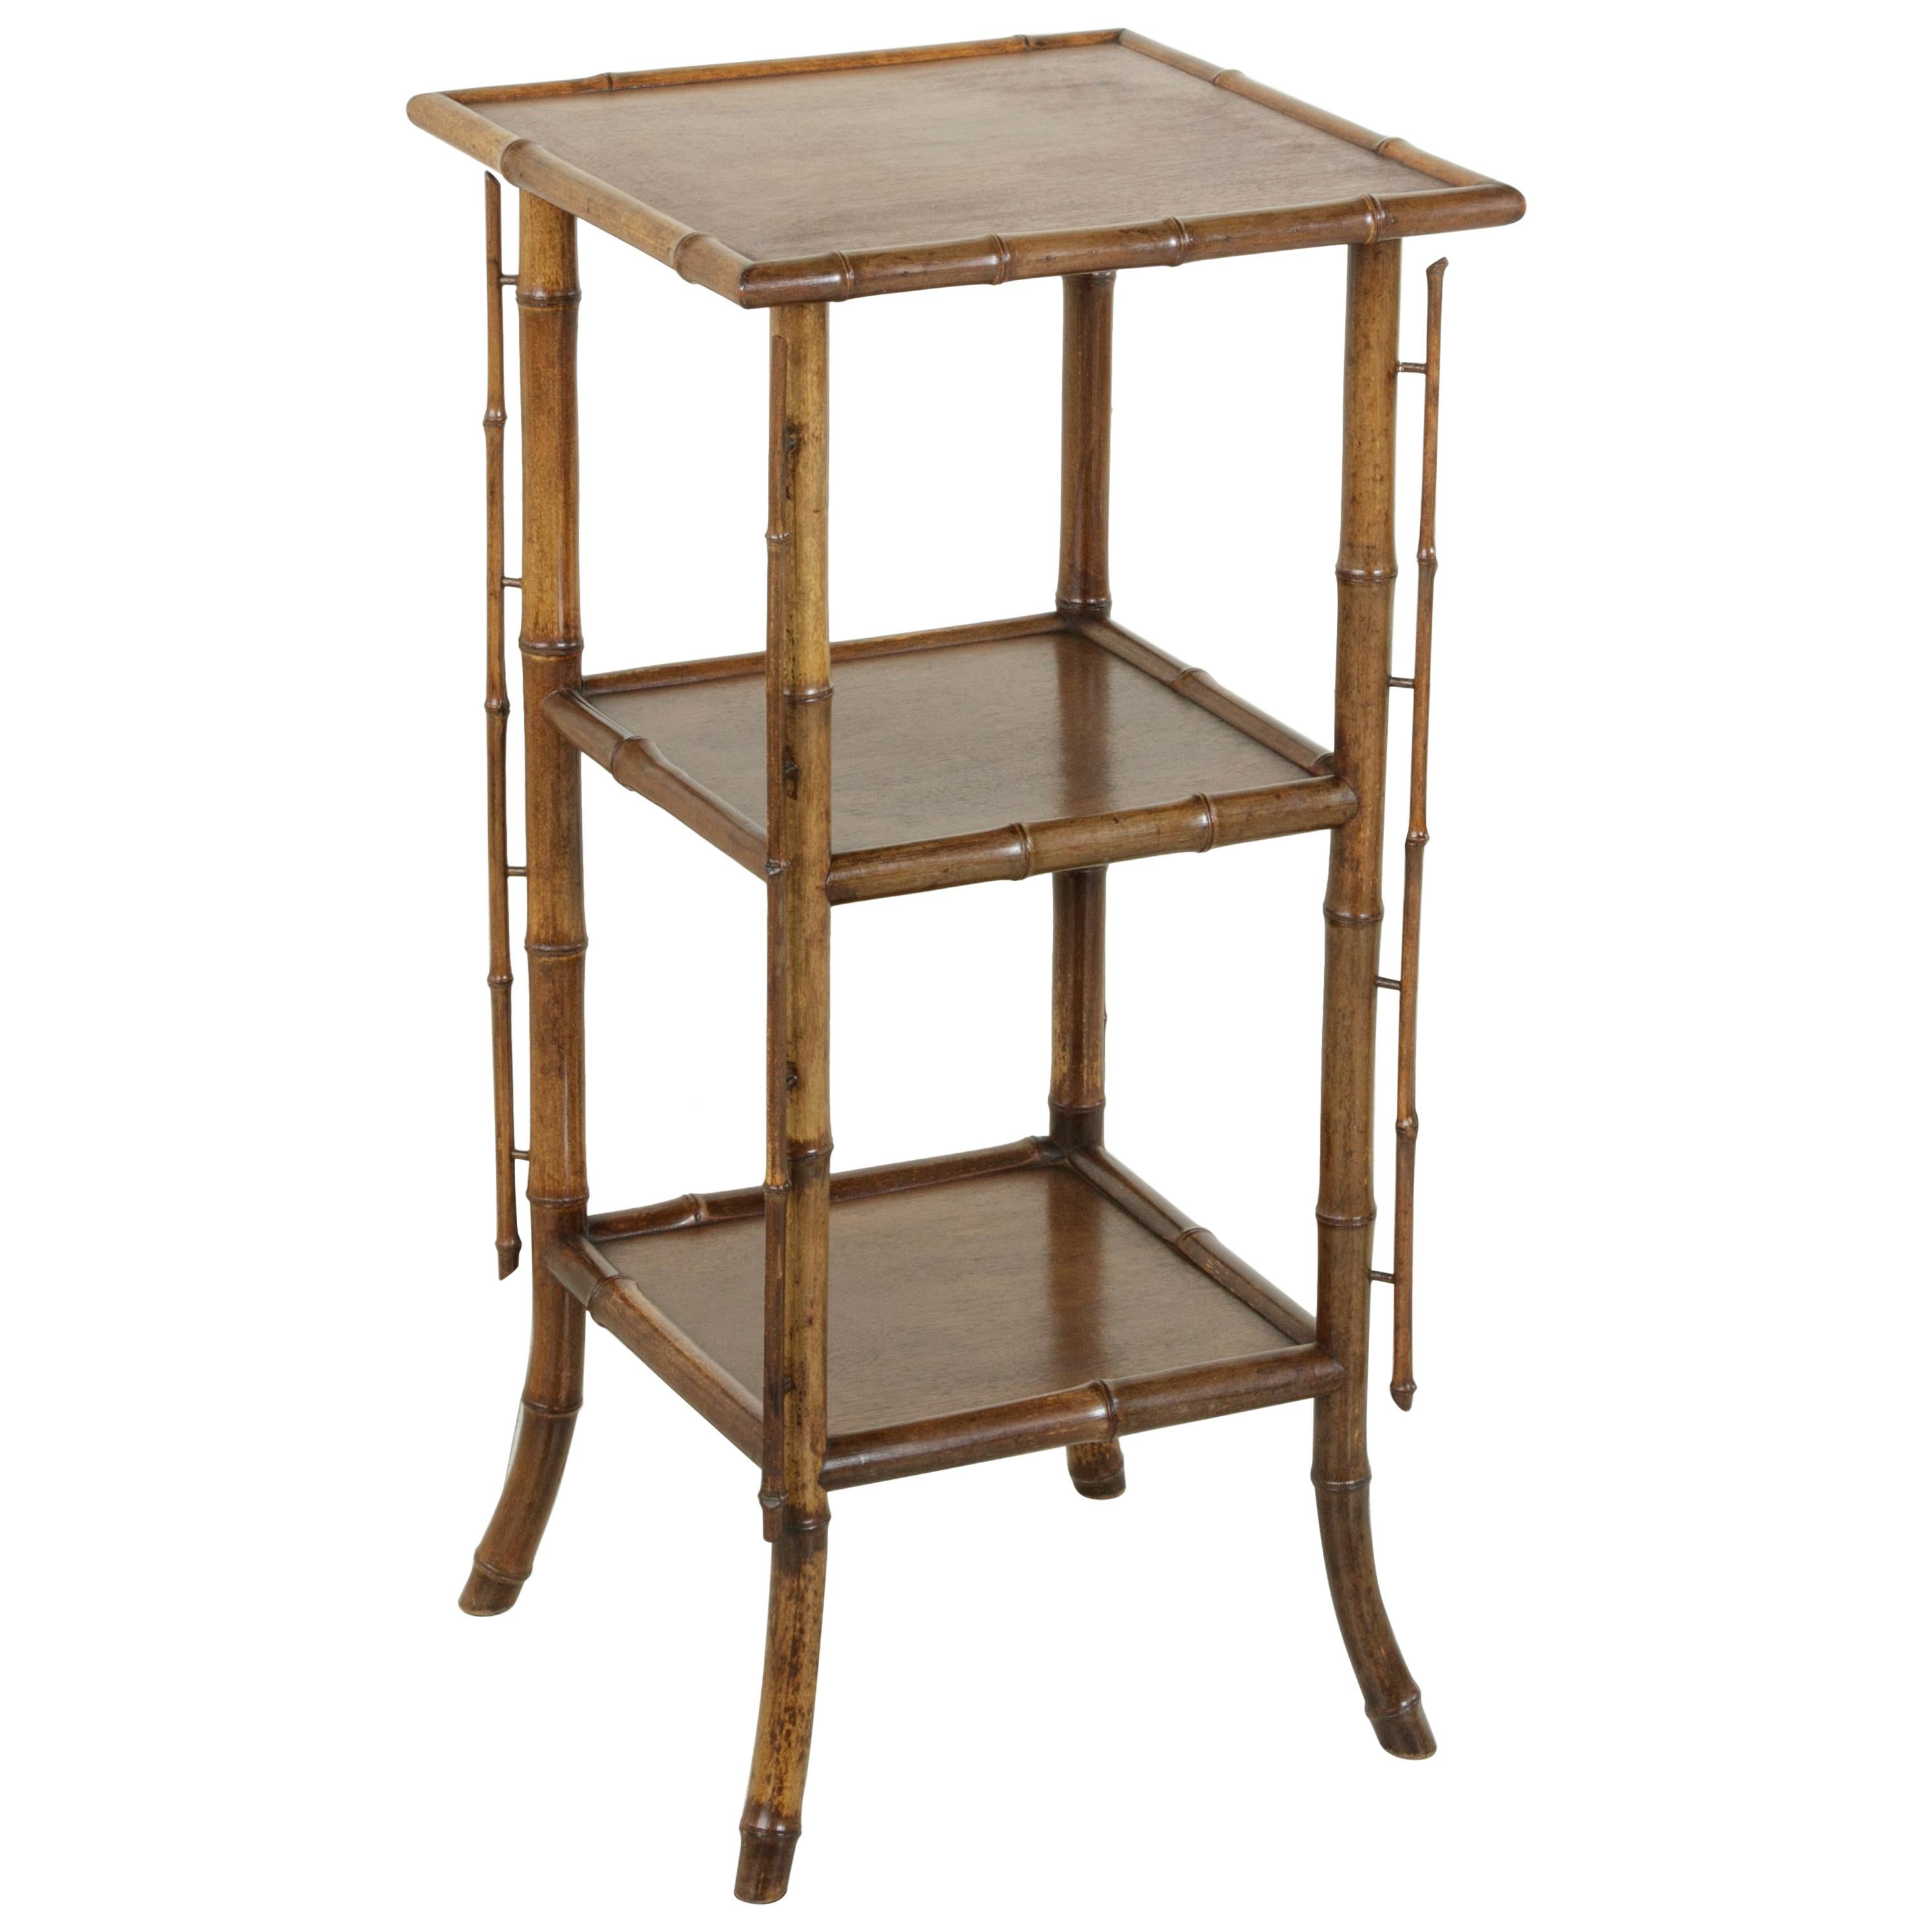 French Bamboo Fern Stand or Side Table with Three Mahogany Shelves, circa 1900